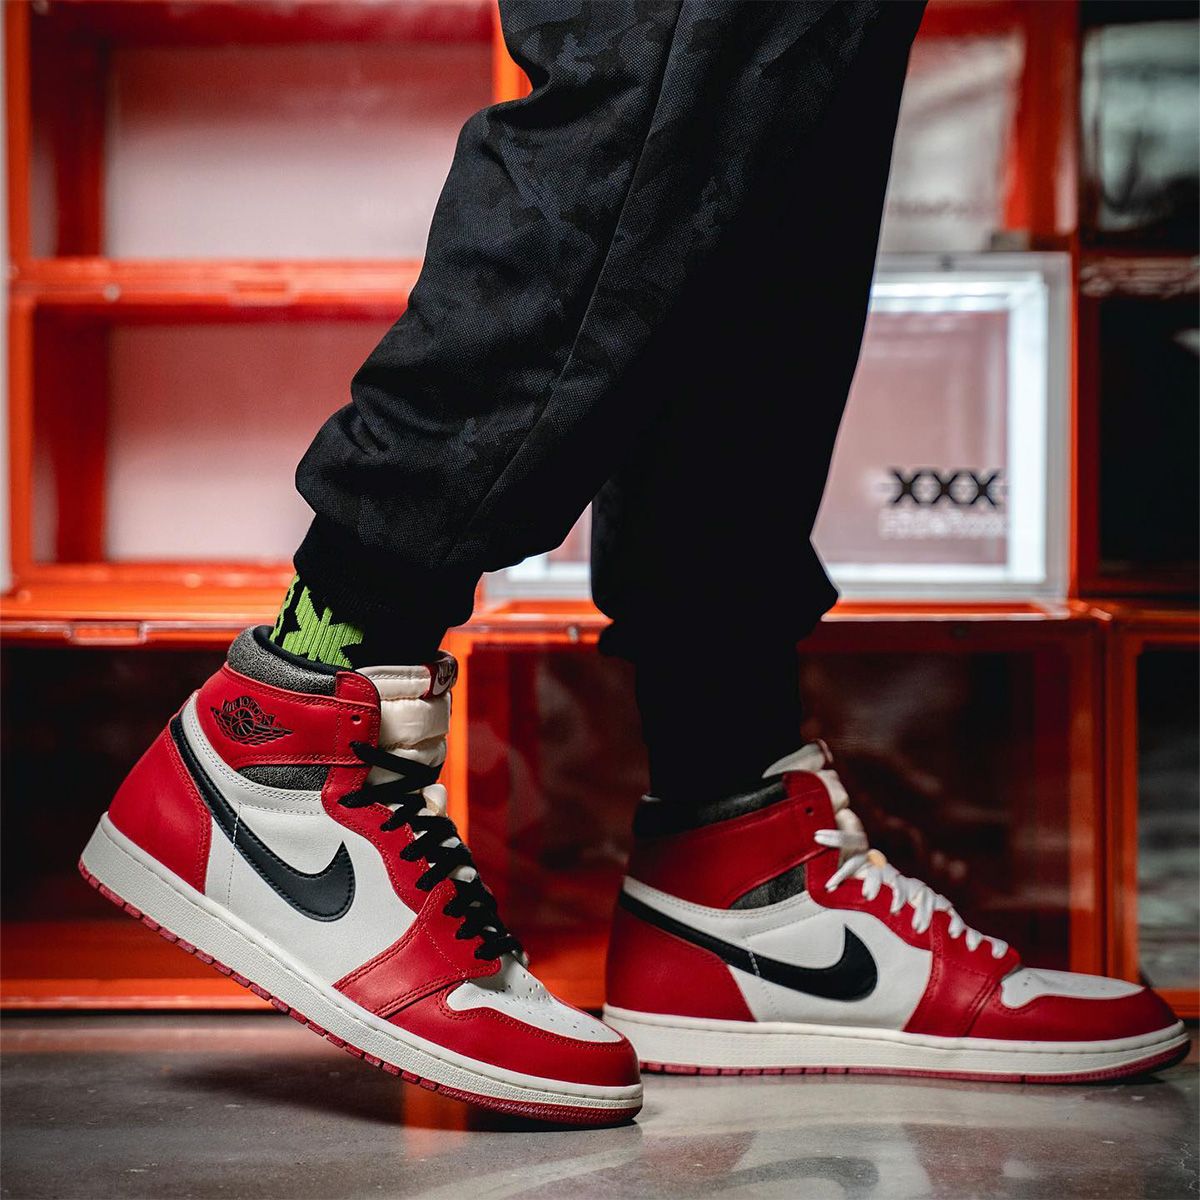 Where to Buy the Air Jordan 1 High OG “Lost and Found” | House of 